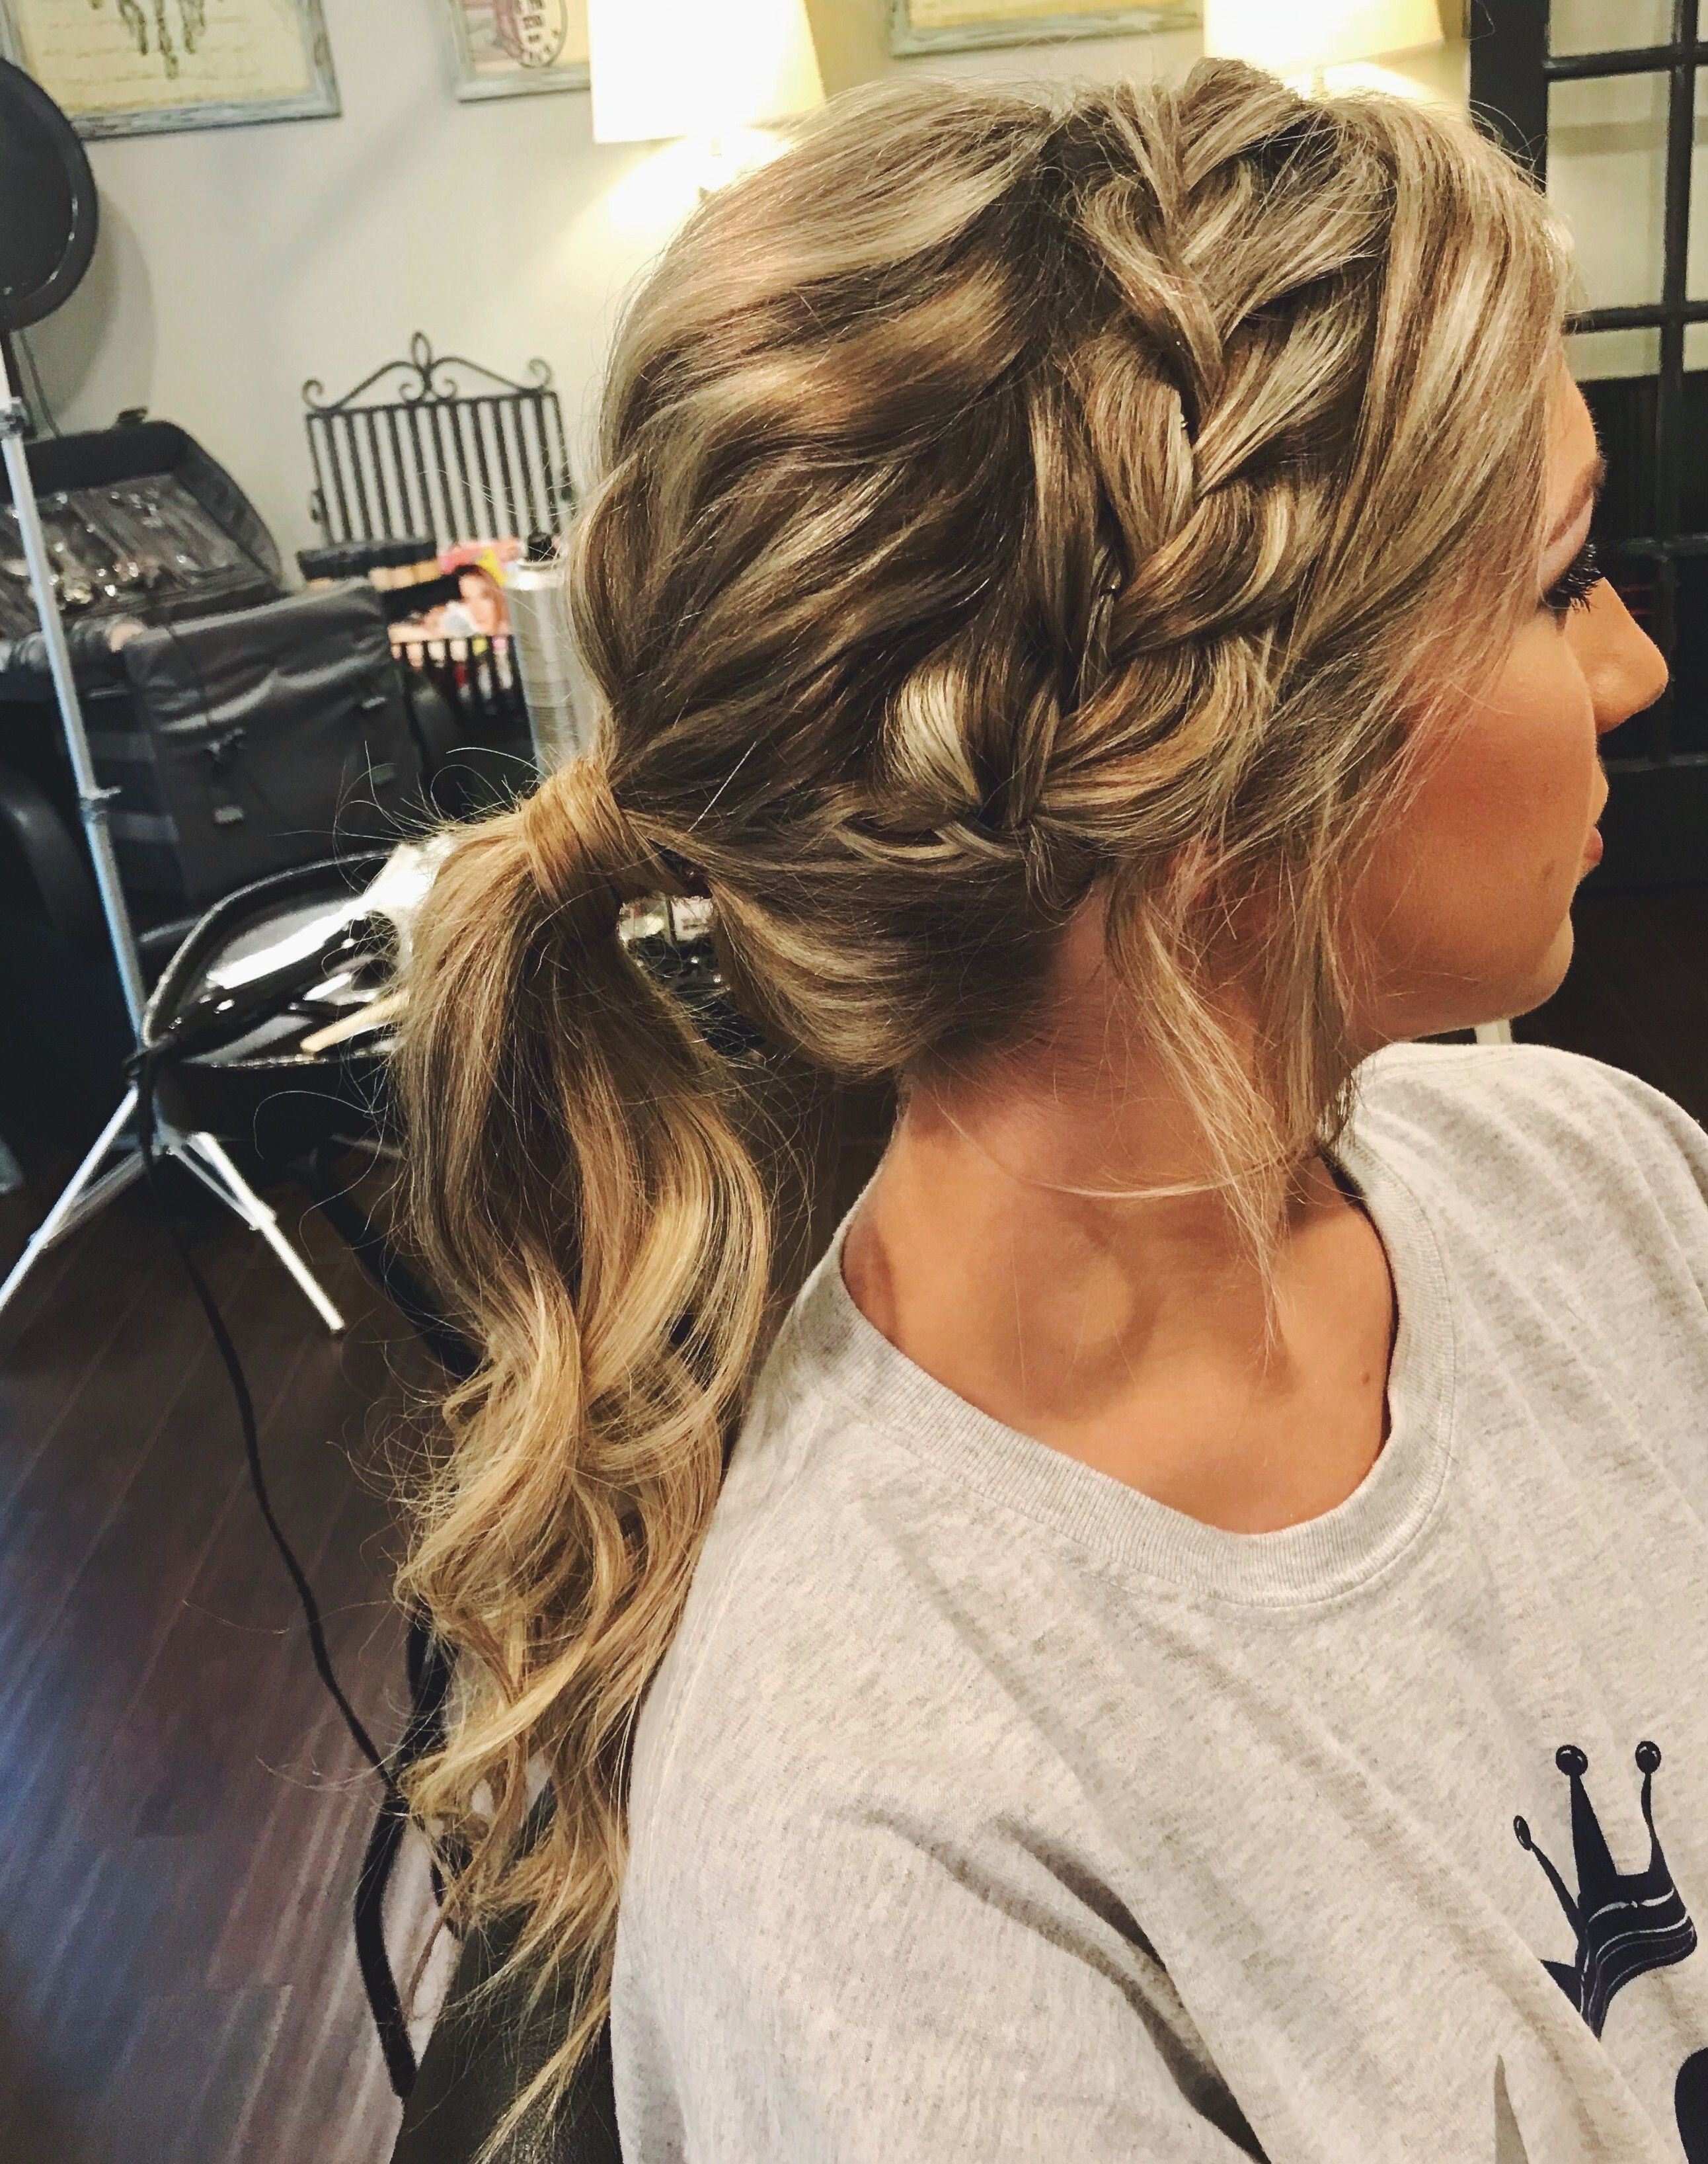 Braid Prom Hairstyles Inspirational Wedding Hairstyles For Toddlers Throughout Most Popular Chic Waterfall Braid Prom Updos (View 18 of 20)